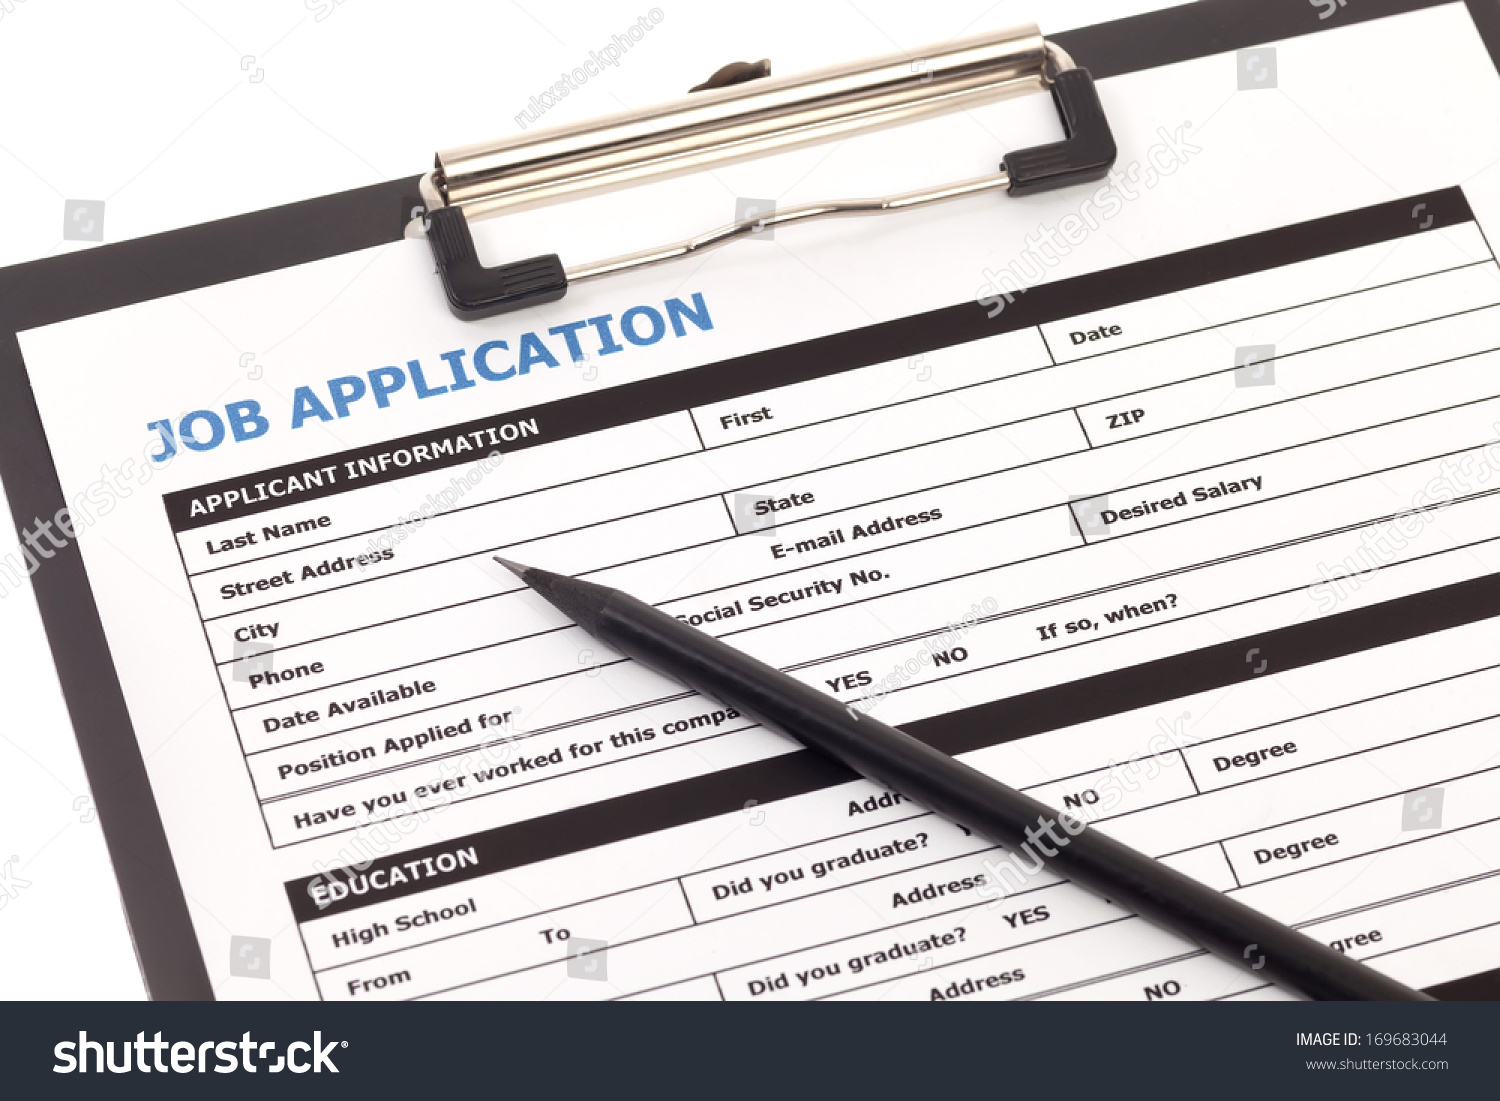 Job application form with pencil isolated on white background #169683044